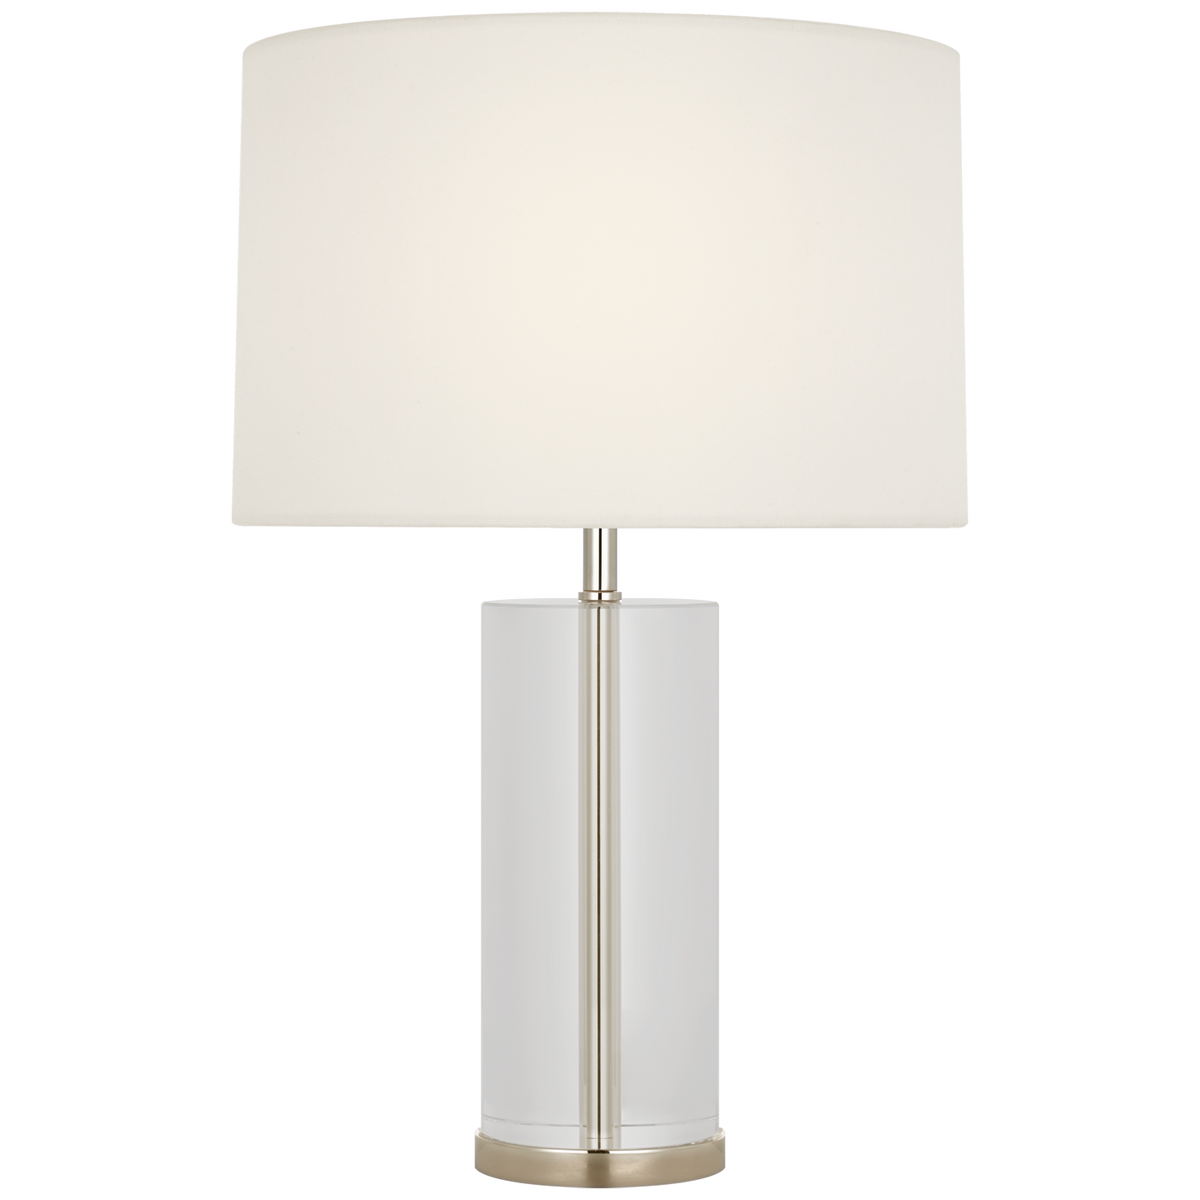 Lineham Cordless Accent Lamp 16 Inch - Crystal and Polished Nickel